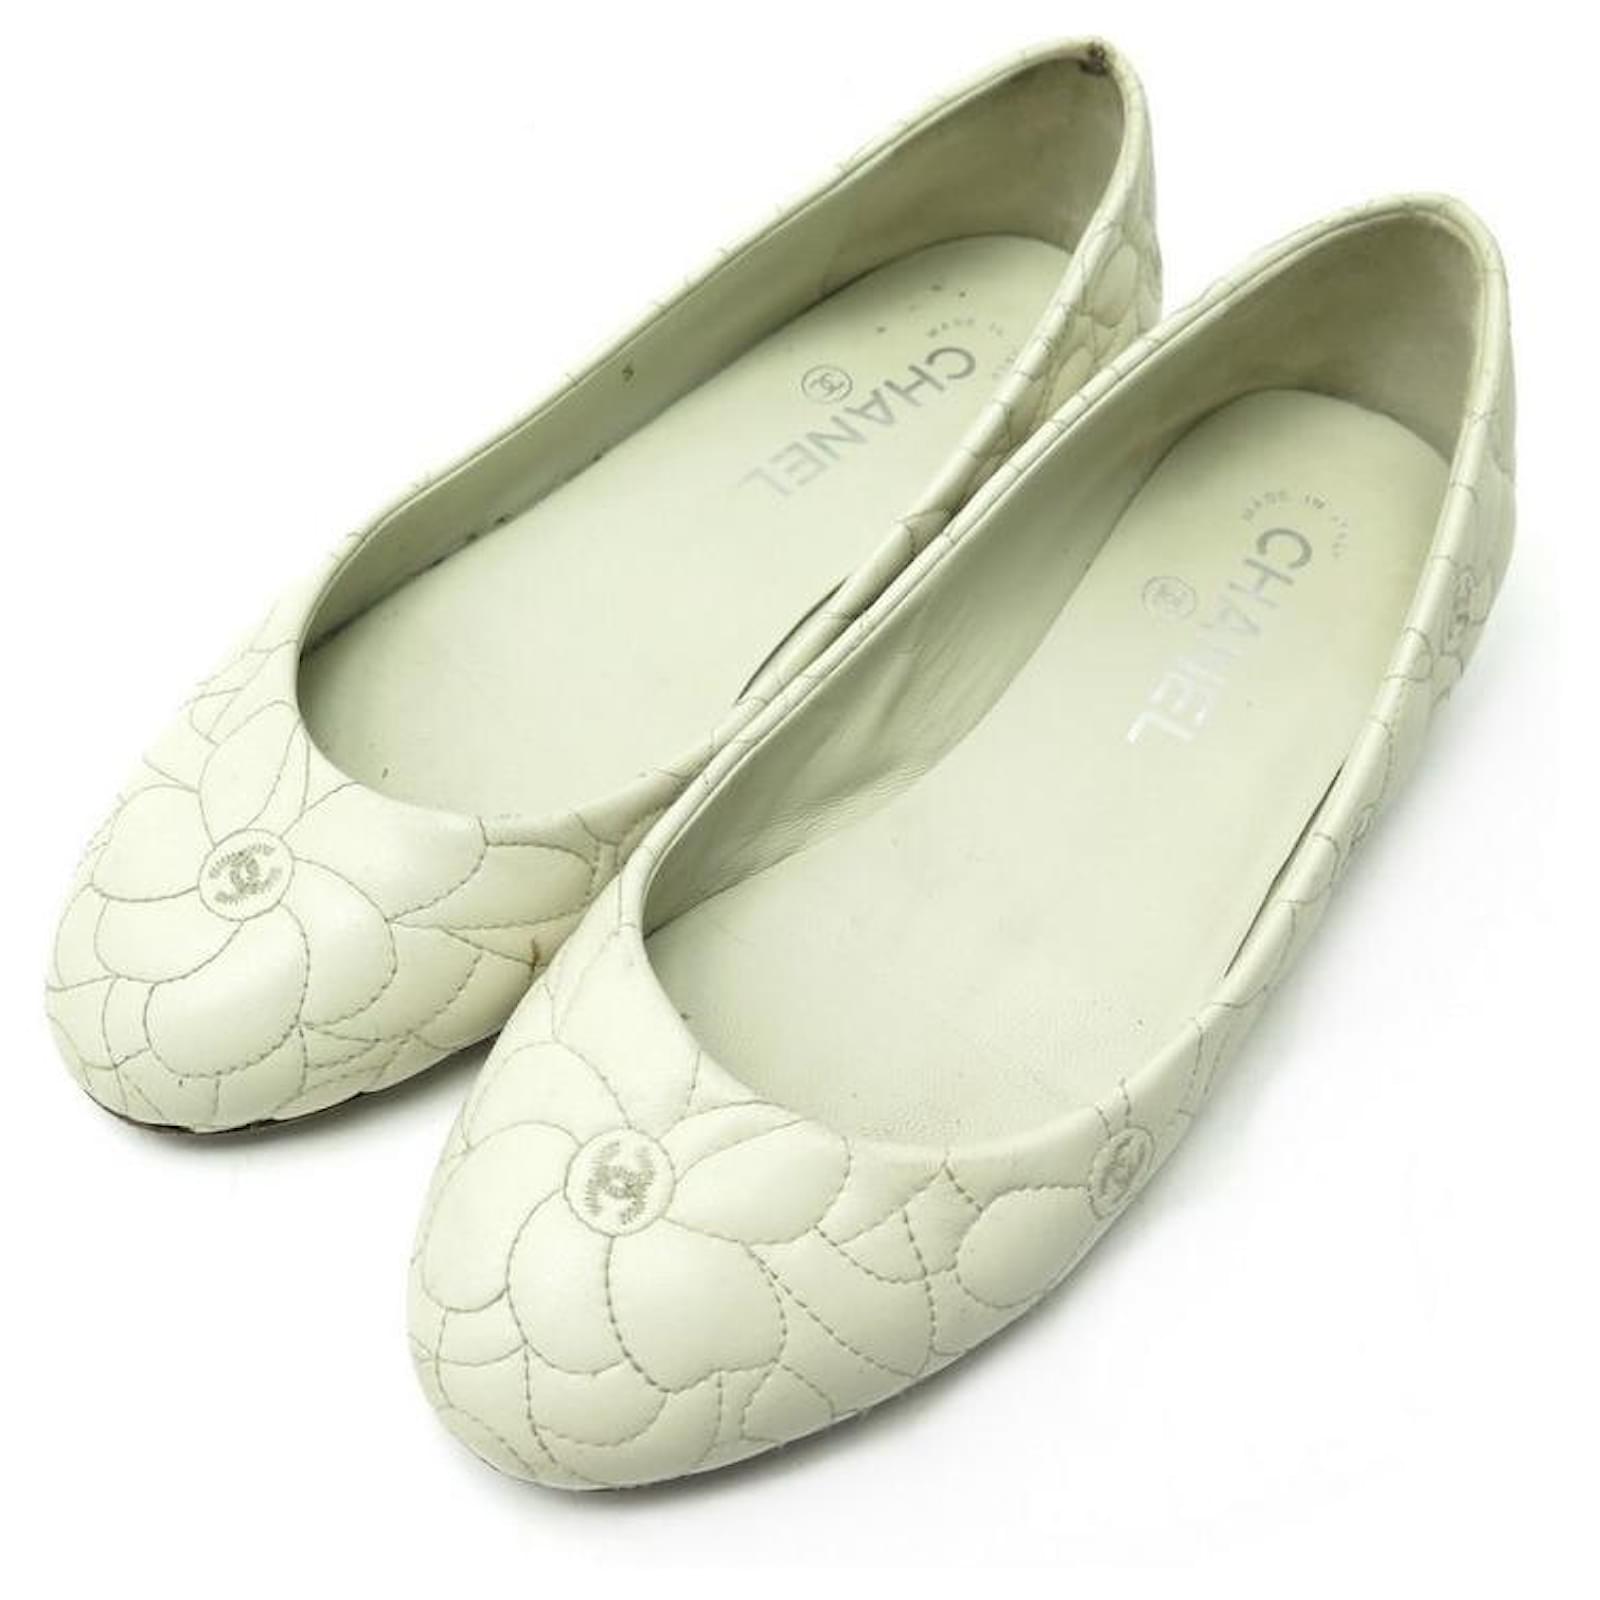 CHANEL CAMELIA G SHOES27322 36.5 FLAT SHOES CREAM LEATHER BALLERINAS